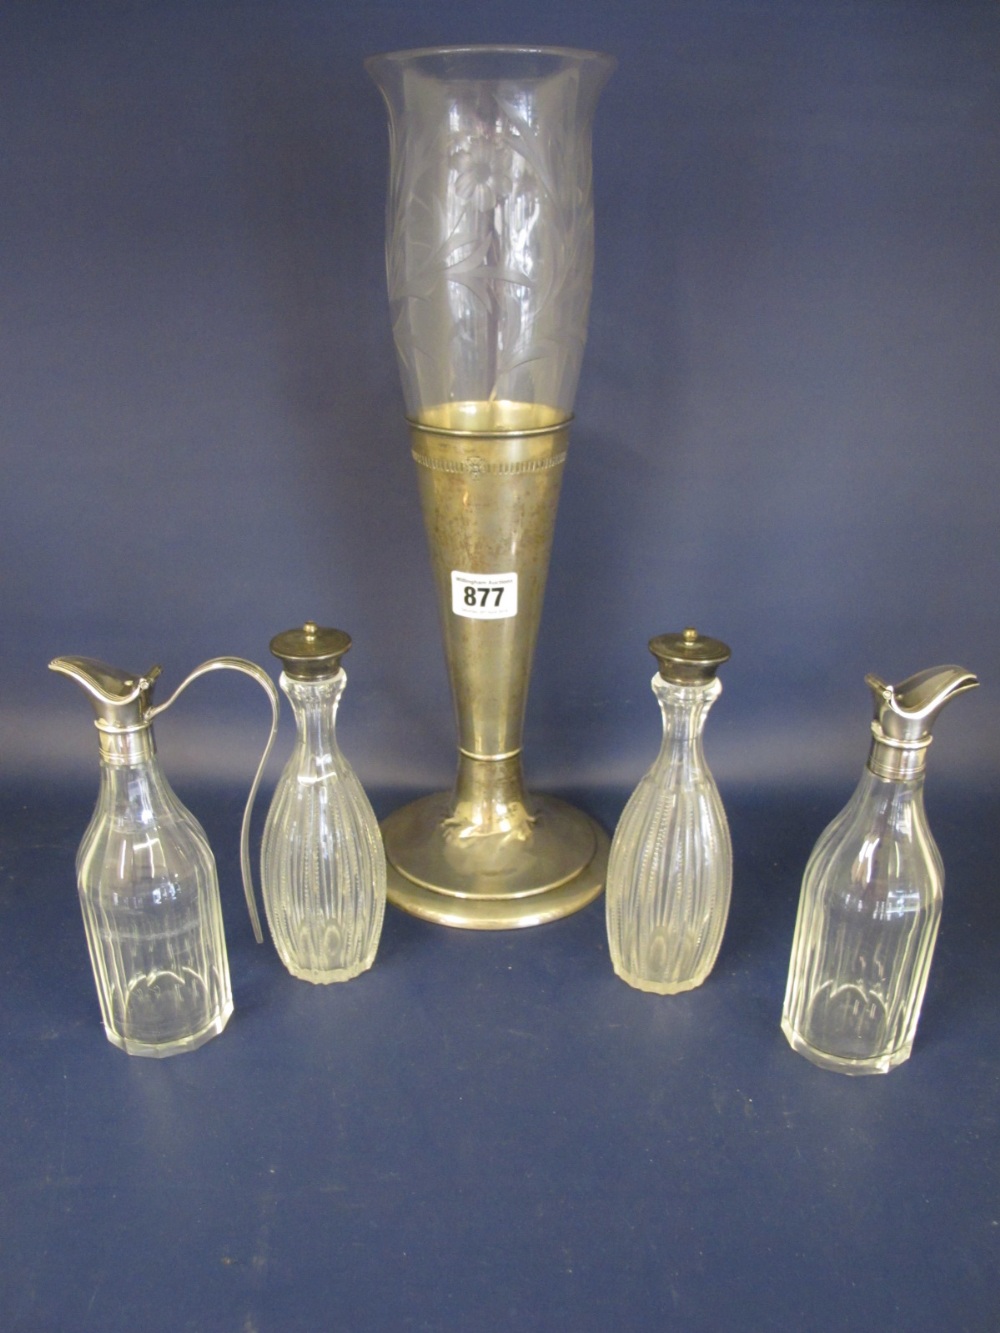 A pair of oil bottles with plated tops - one handle missing, a pair of cruet bottles with silver